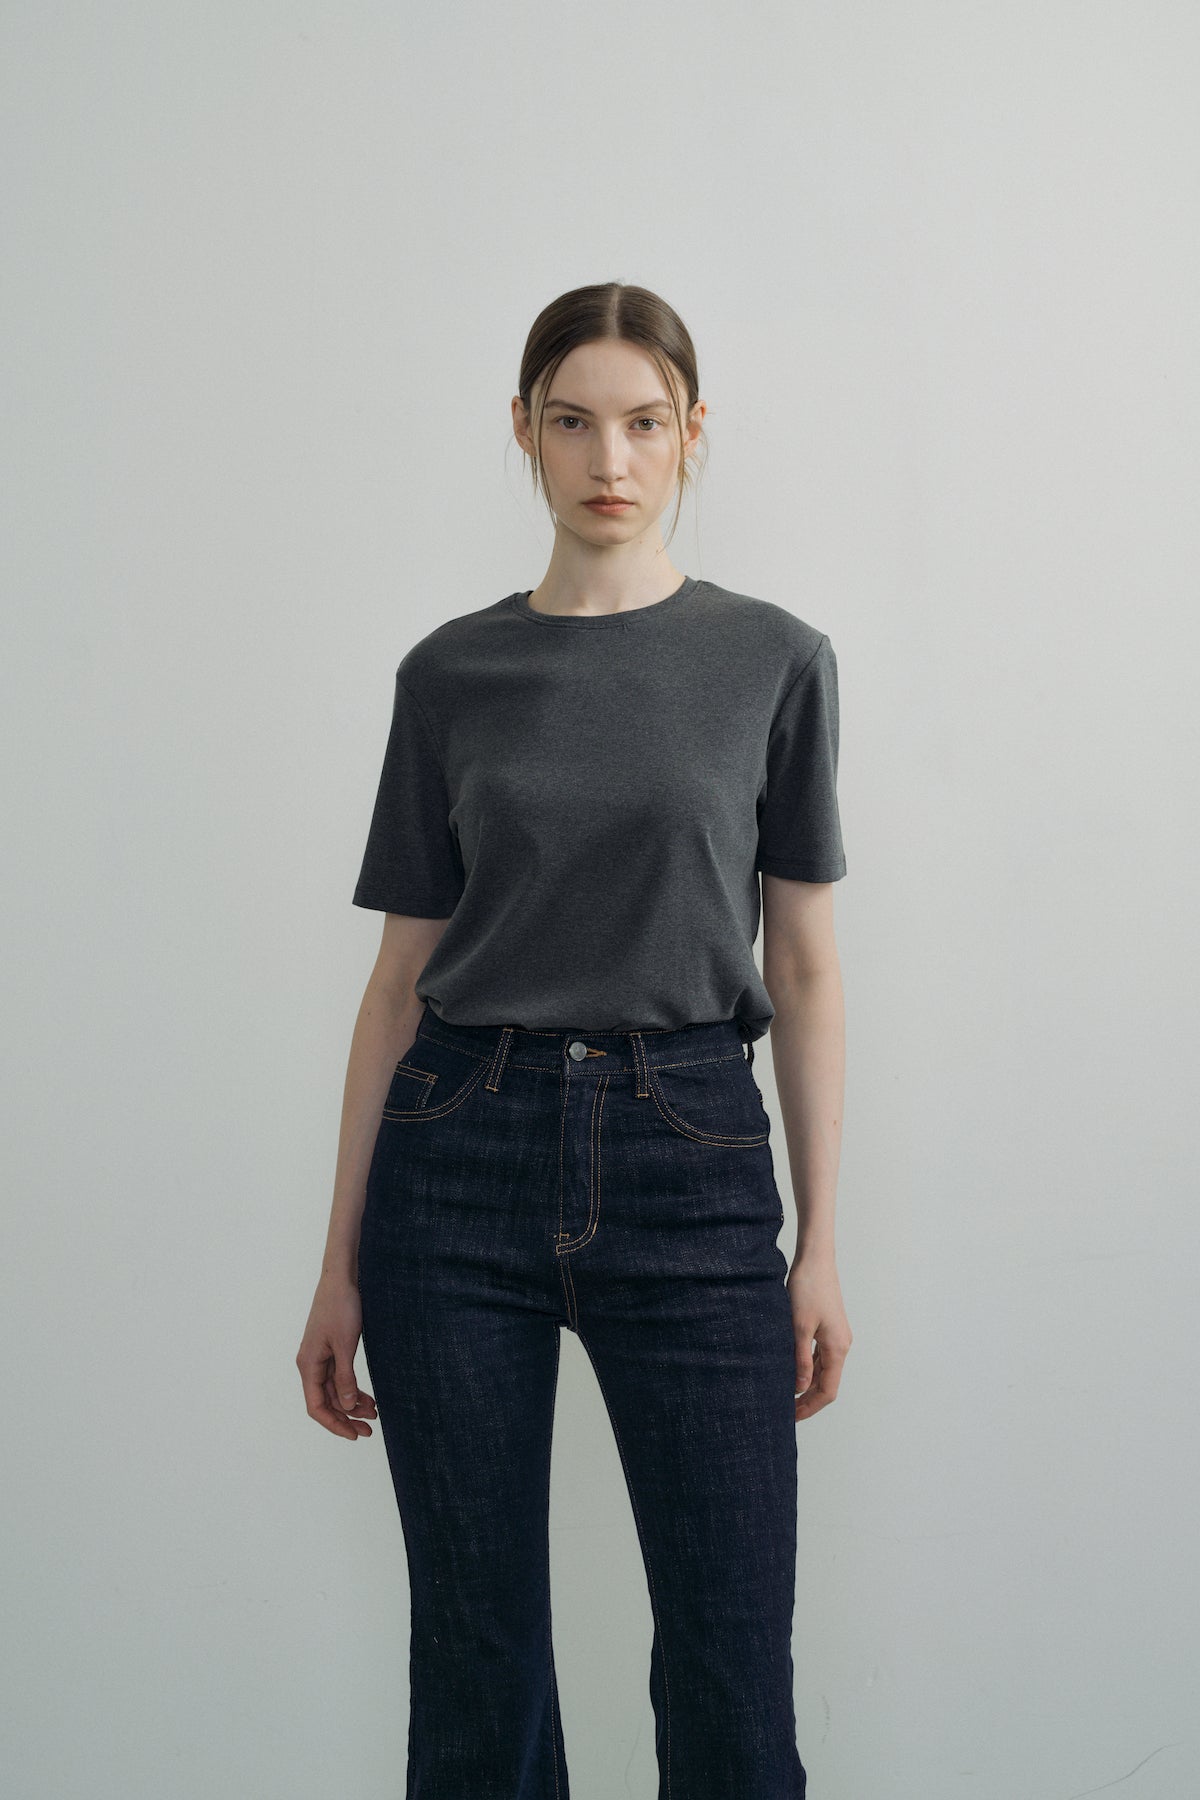 Daily Organic Cotton In Charcoal